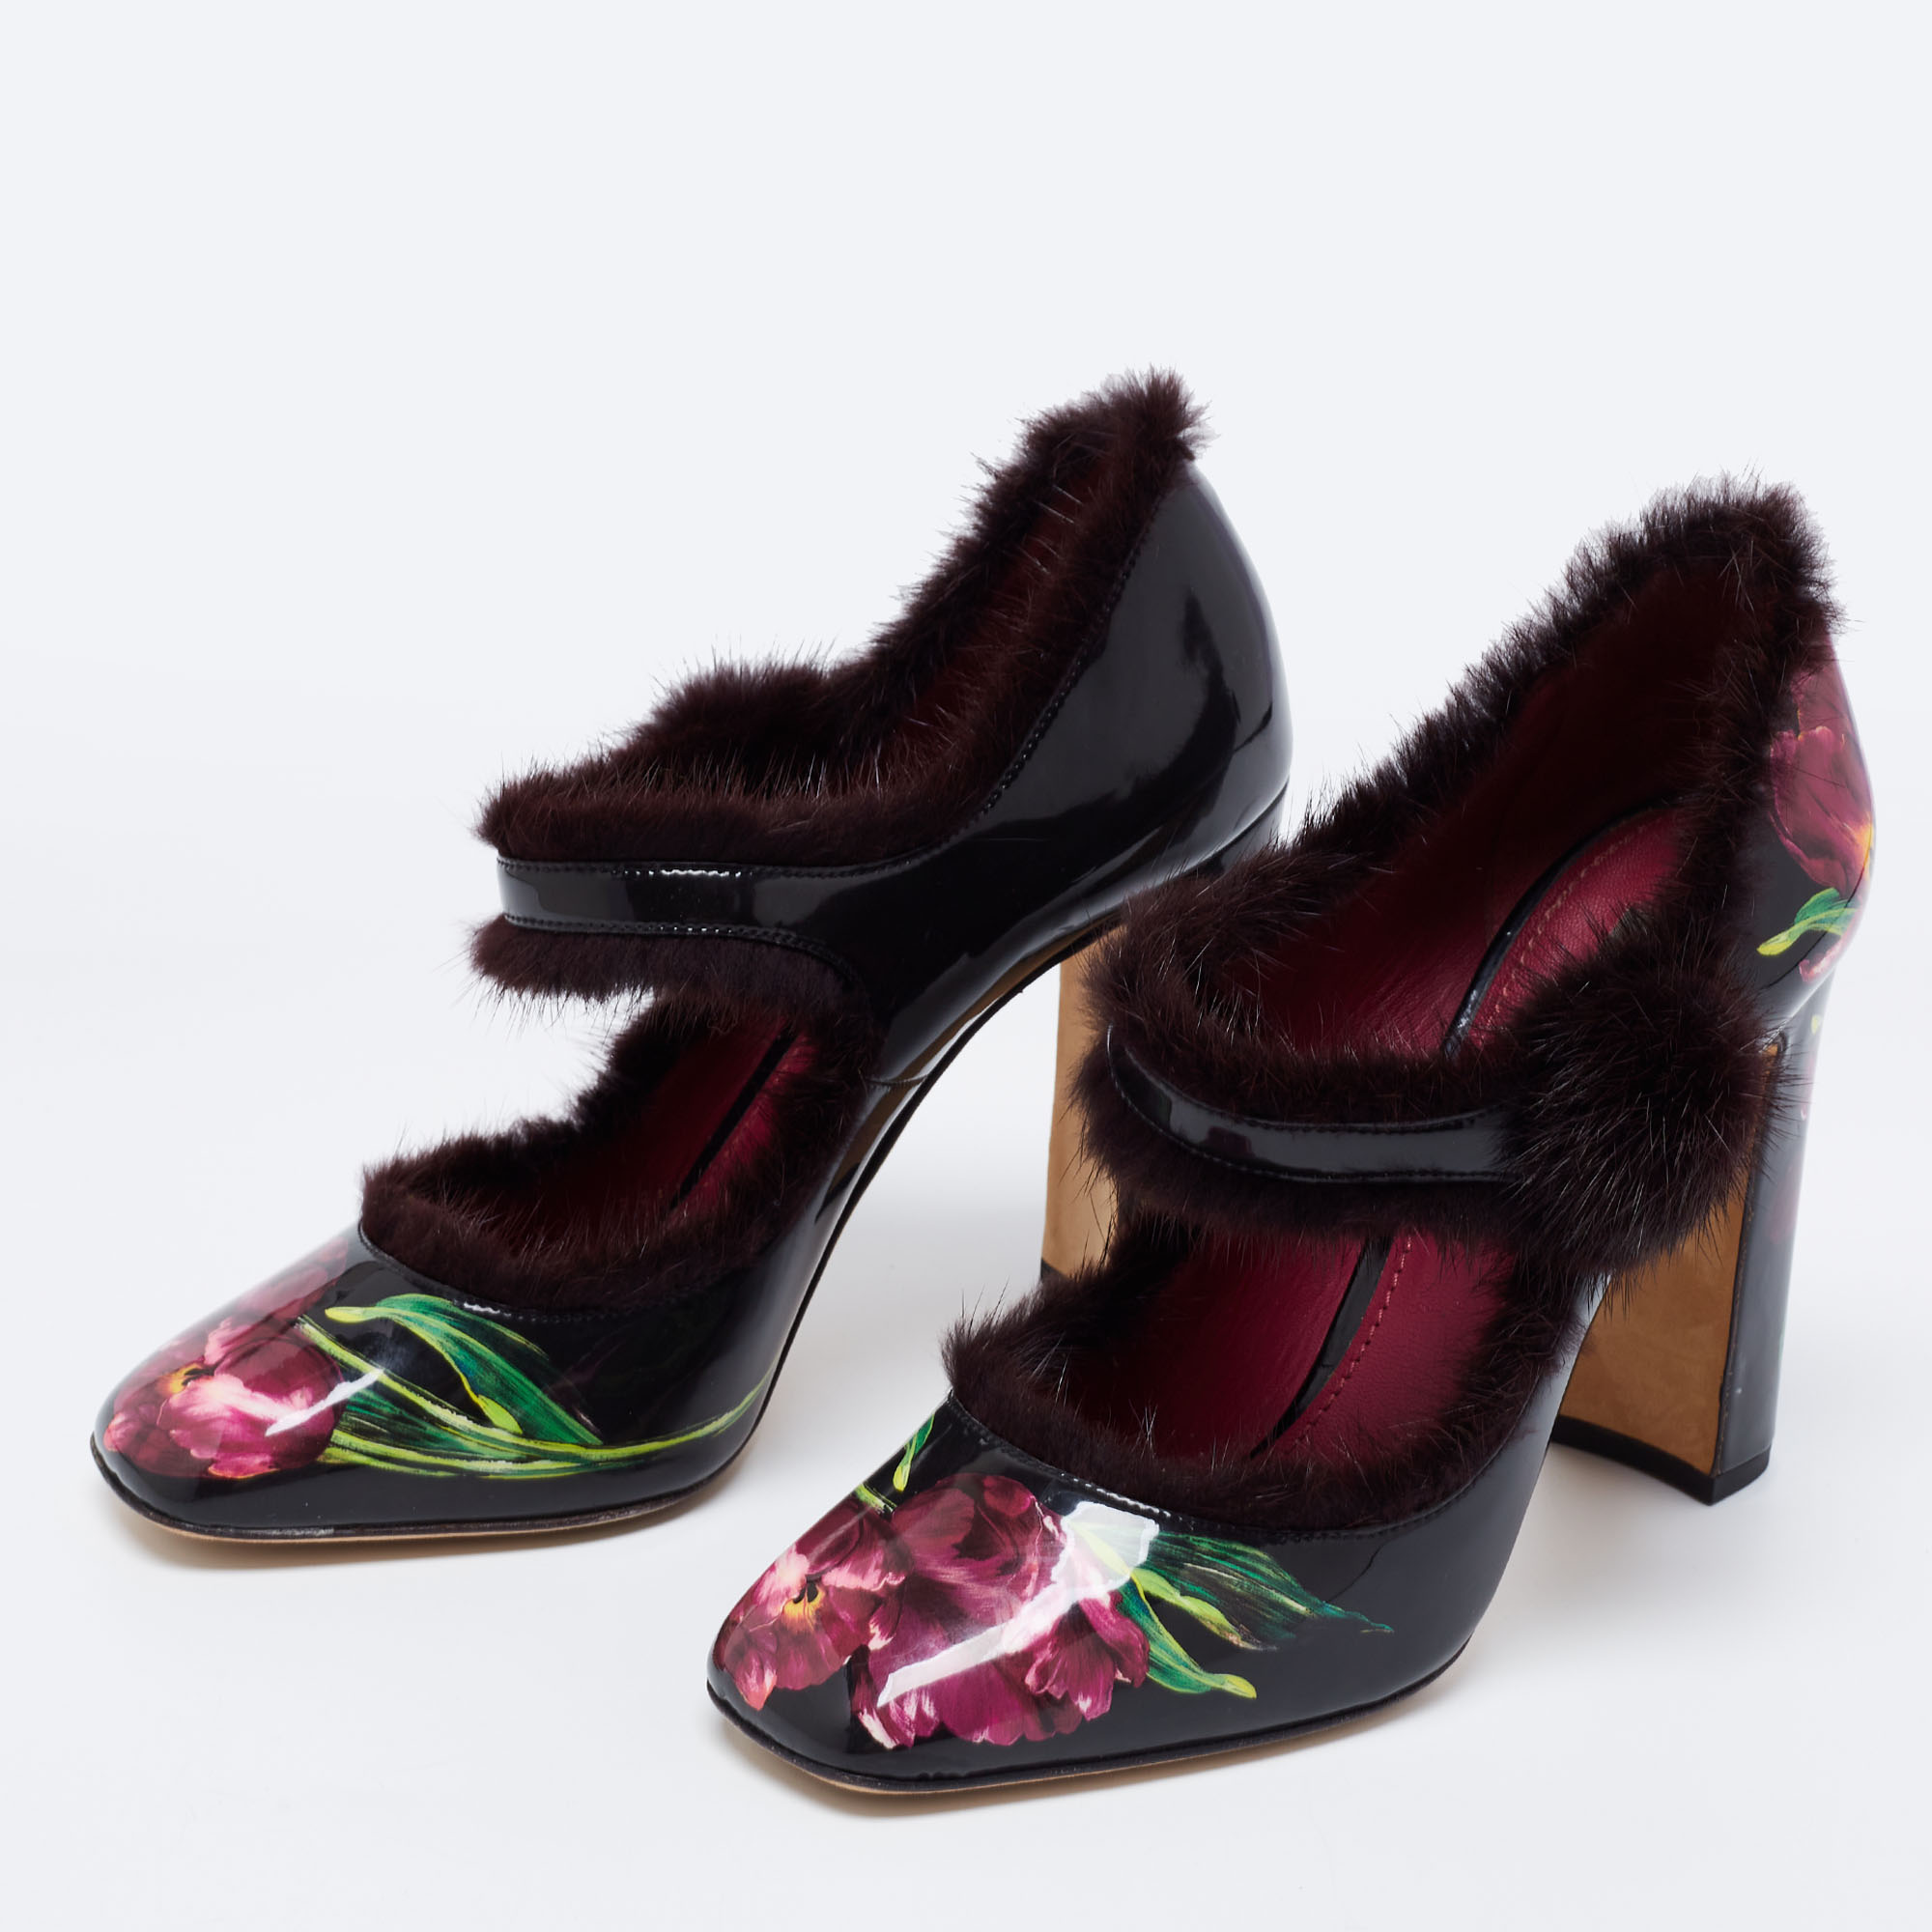 

Dolce & Gabbana Burgundy/Black Floral Print Patent Leather and Fur Trim Mary Jane Pumps Size